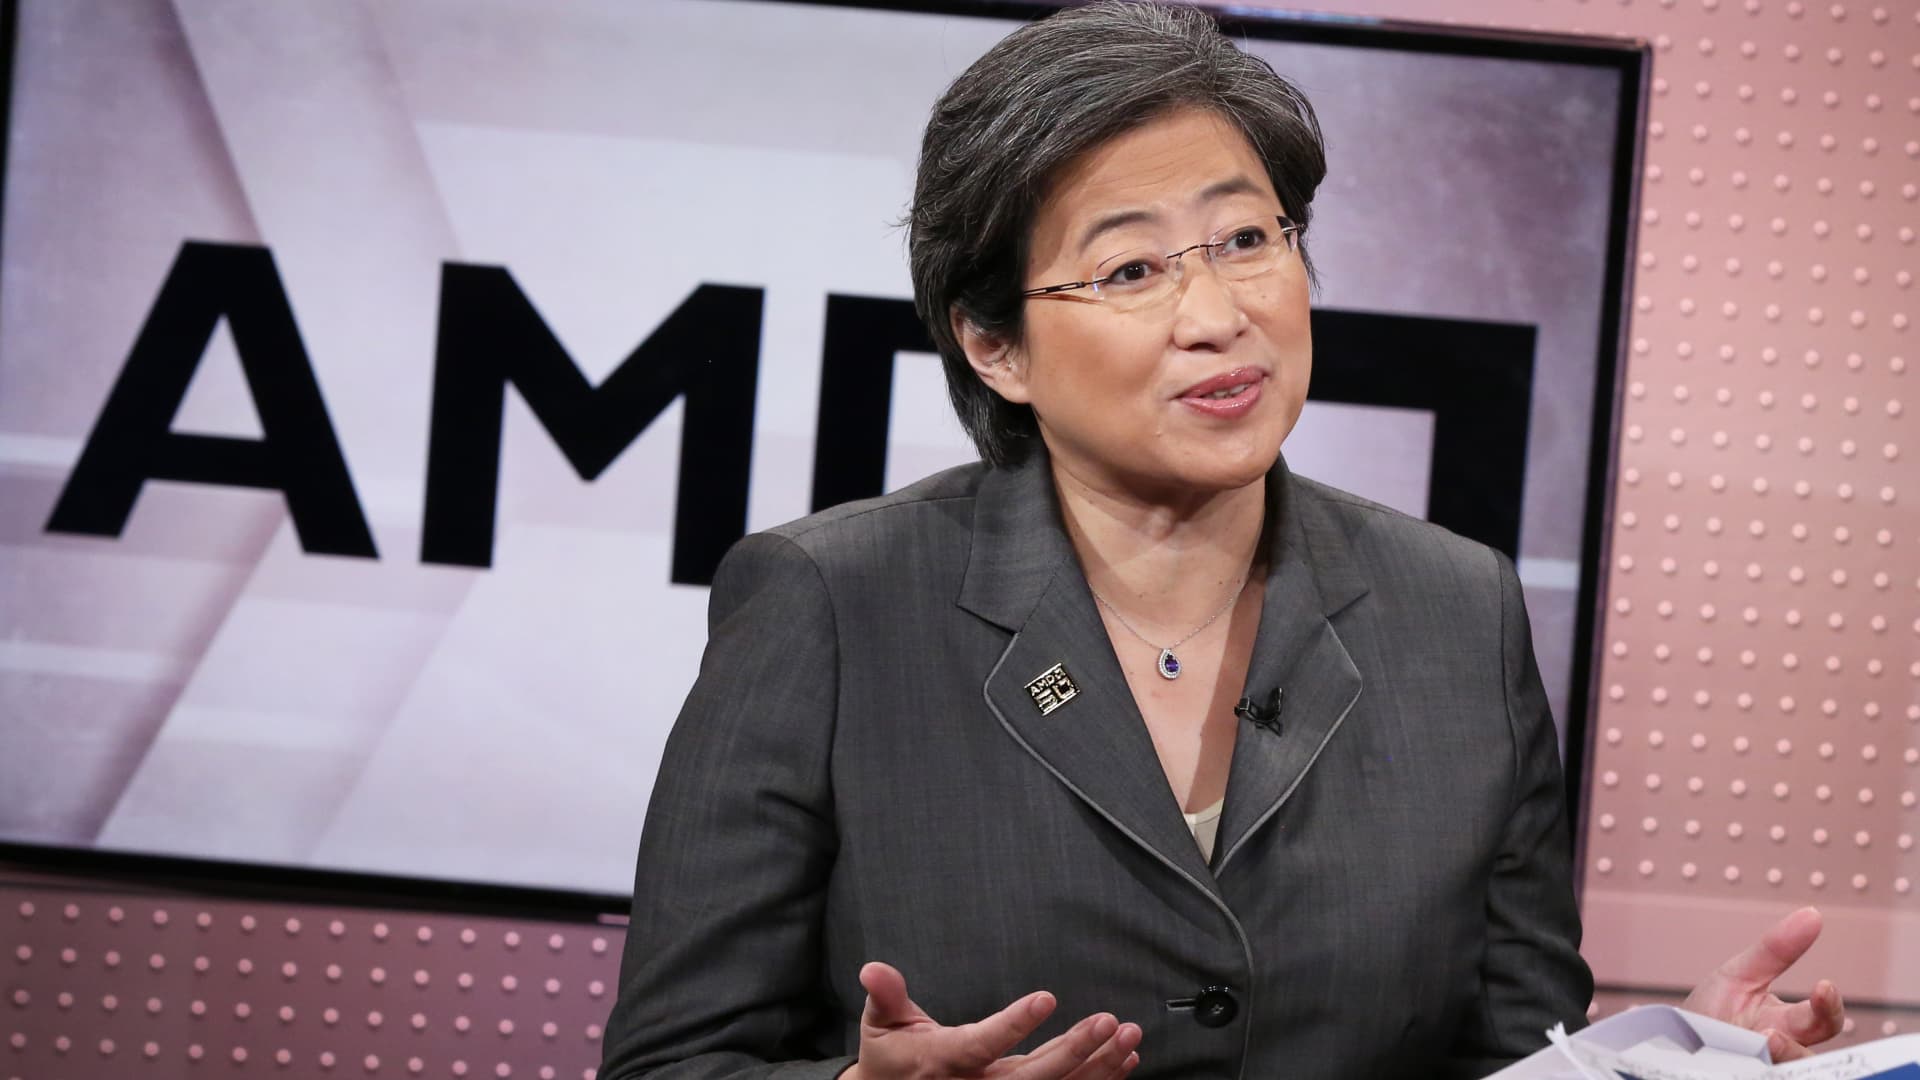 AMD sales jump 71%, shrugging off concerns about PC slowdown